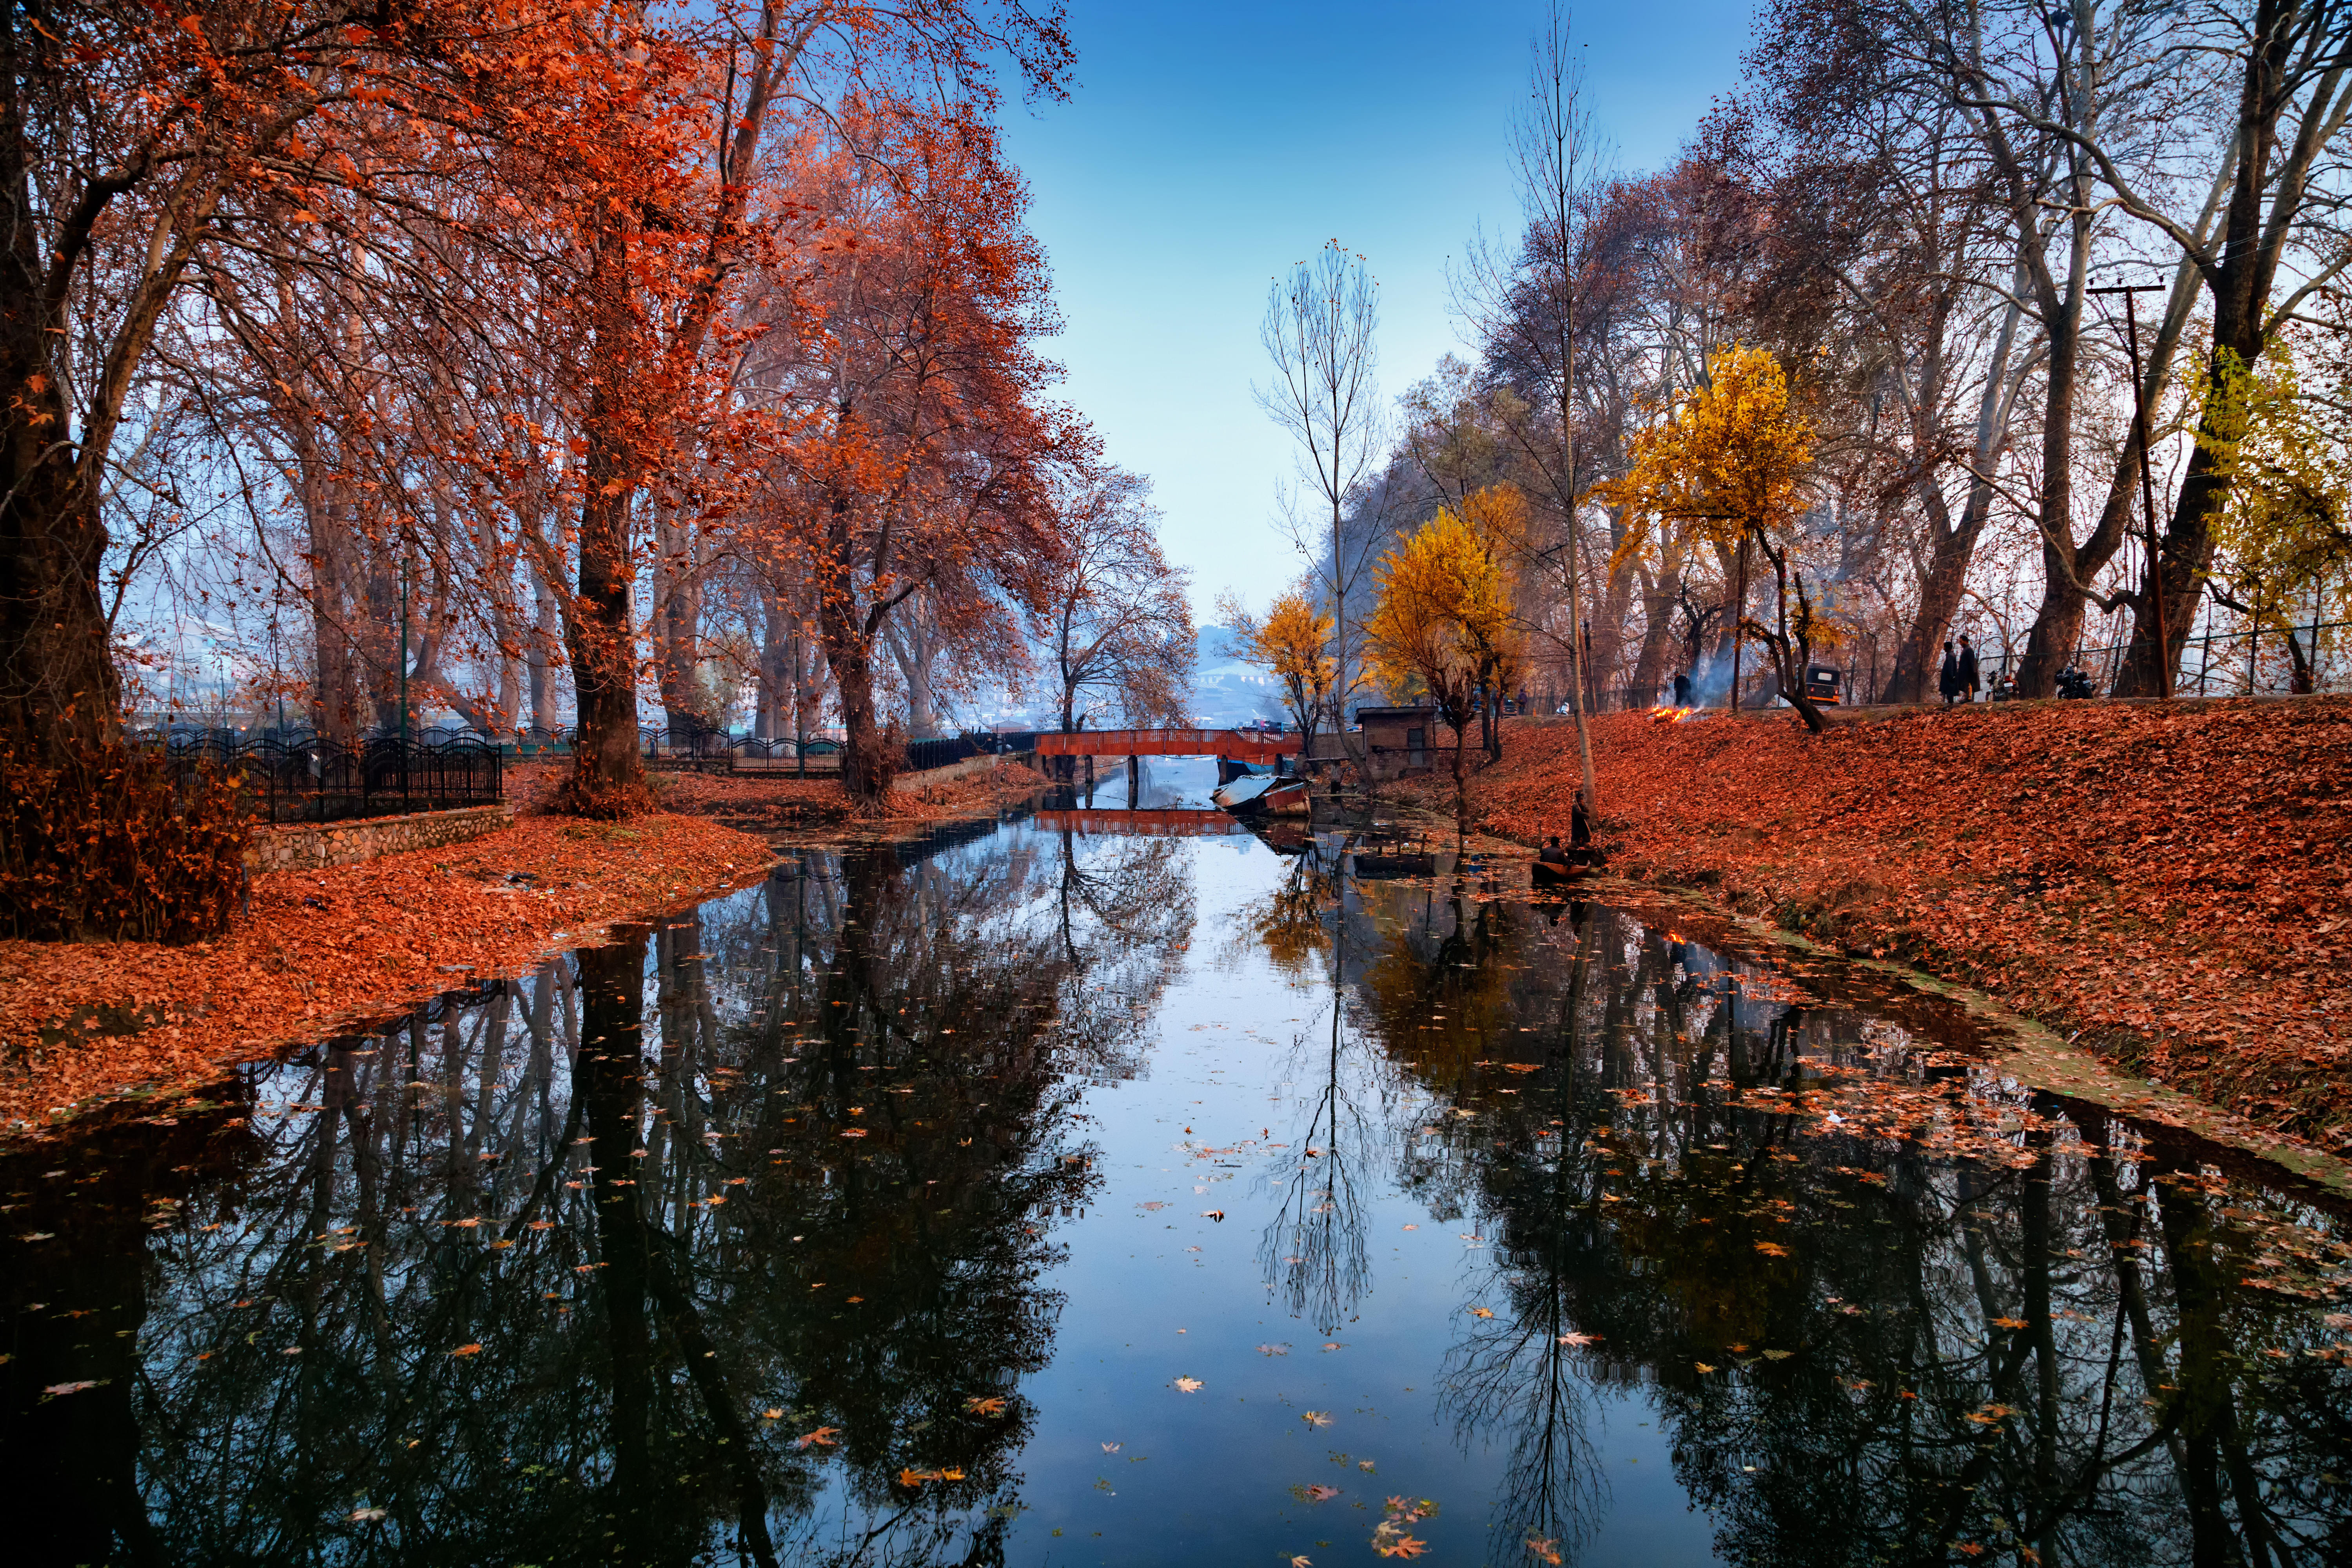 Kashmir Packages from Mumbai | Get Upto 50% Off